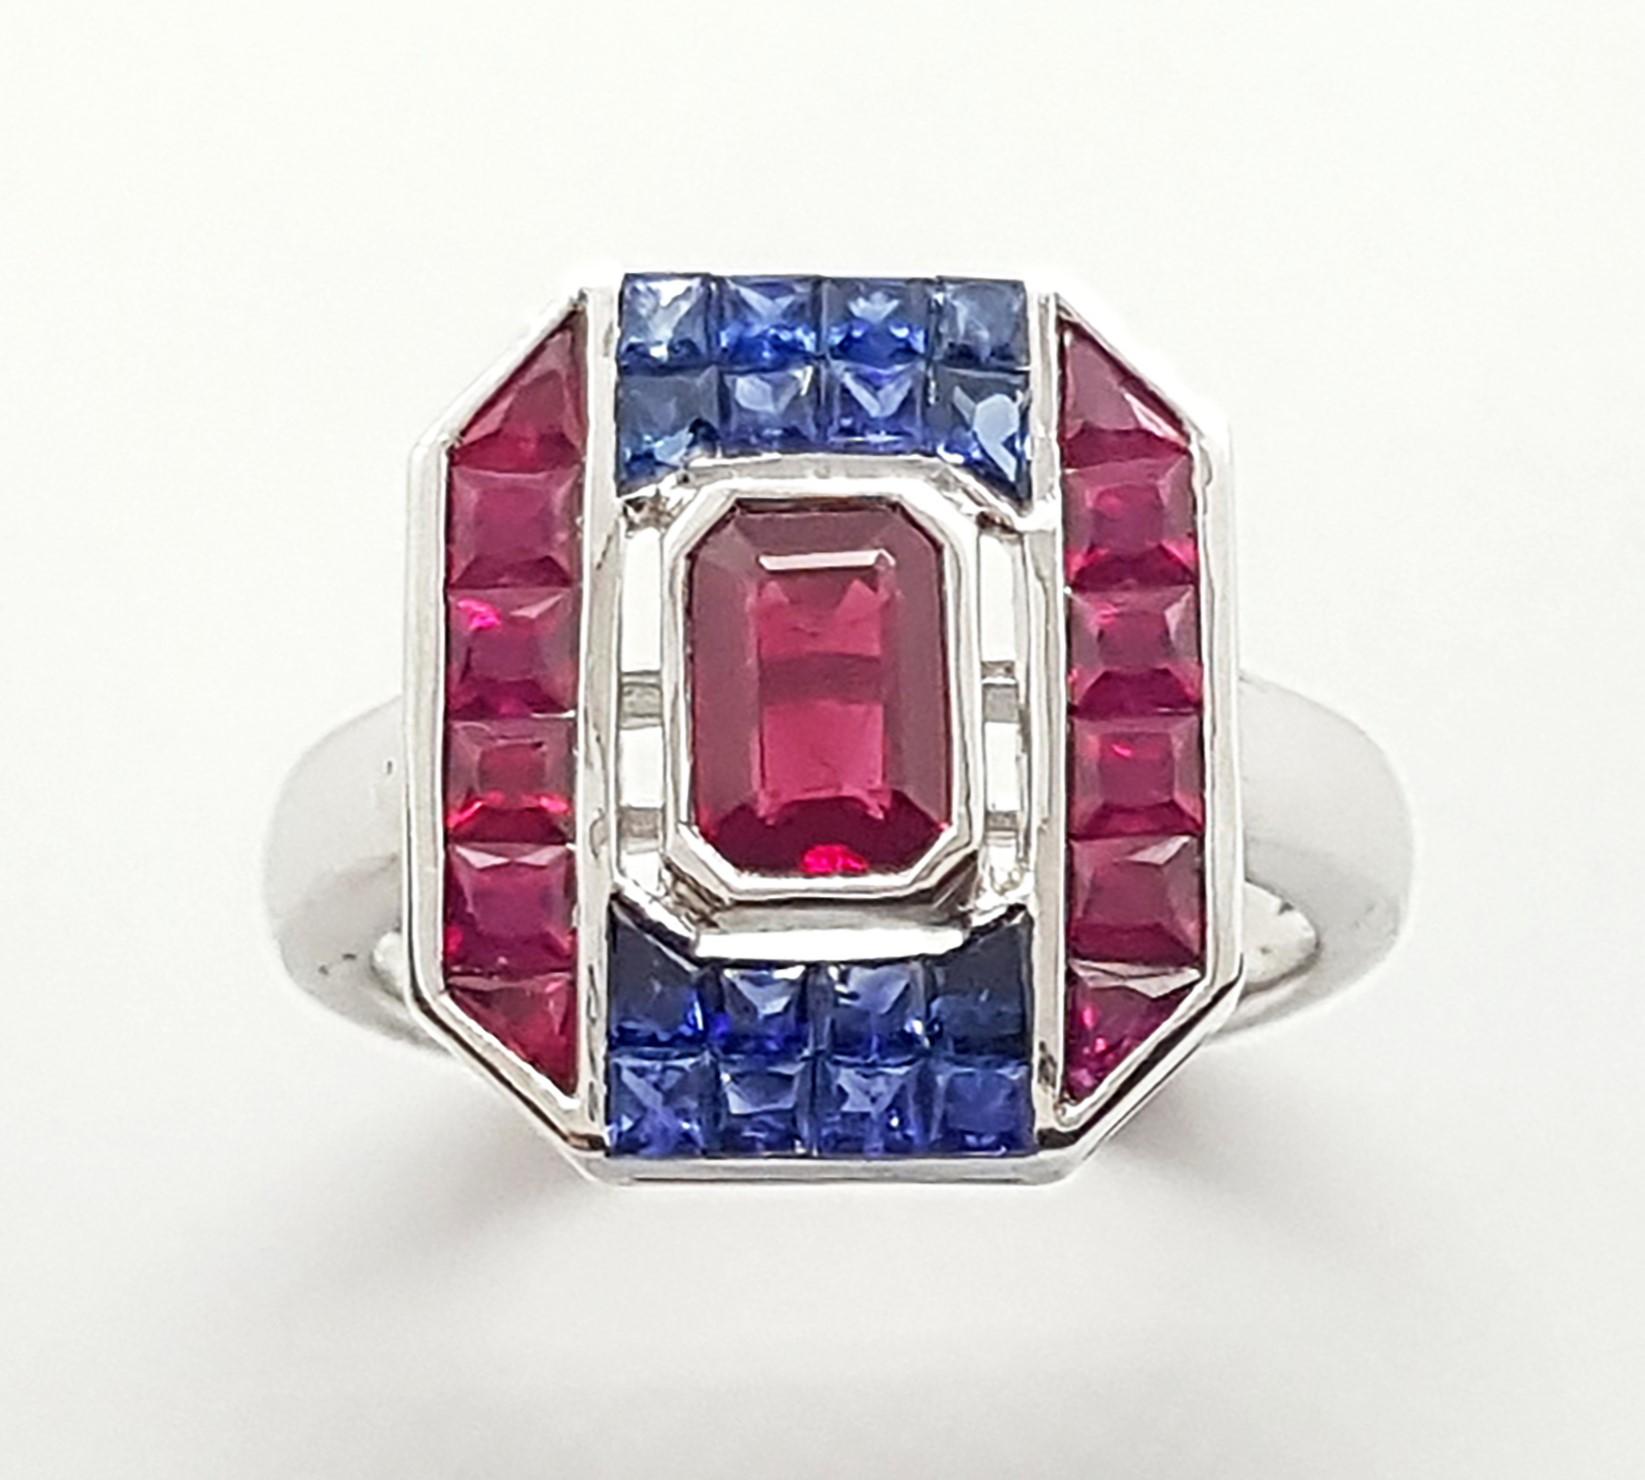 Ruby 1.48 carats with Blue Sapphire 0.66 carat and Ruby 0.73 carat Ring set in 18 Karat White Gold Settings

Width:  1.4 cm 
Length:  1.5 cm
Ring Size: 53
Total Weight: 5.91 grams

Uncompromisingly modern and exuding, the collection draws